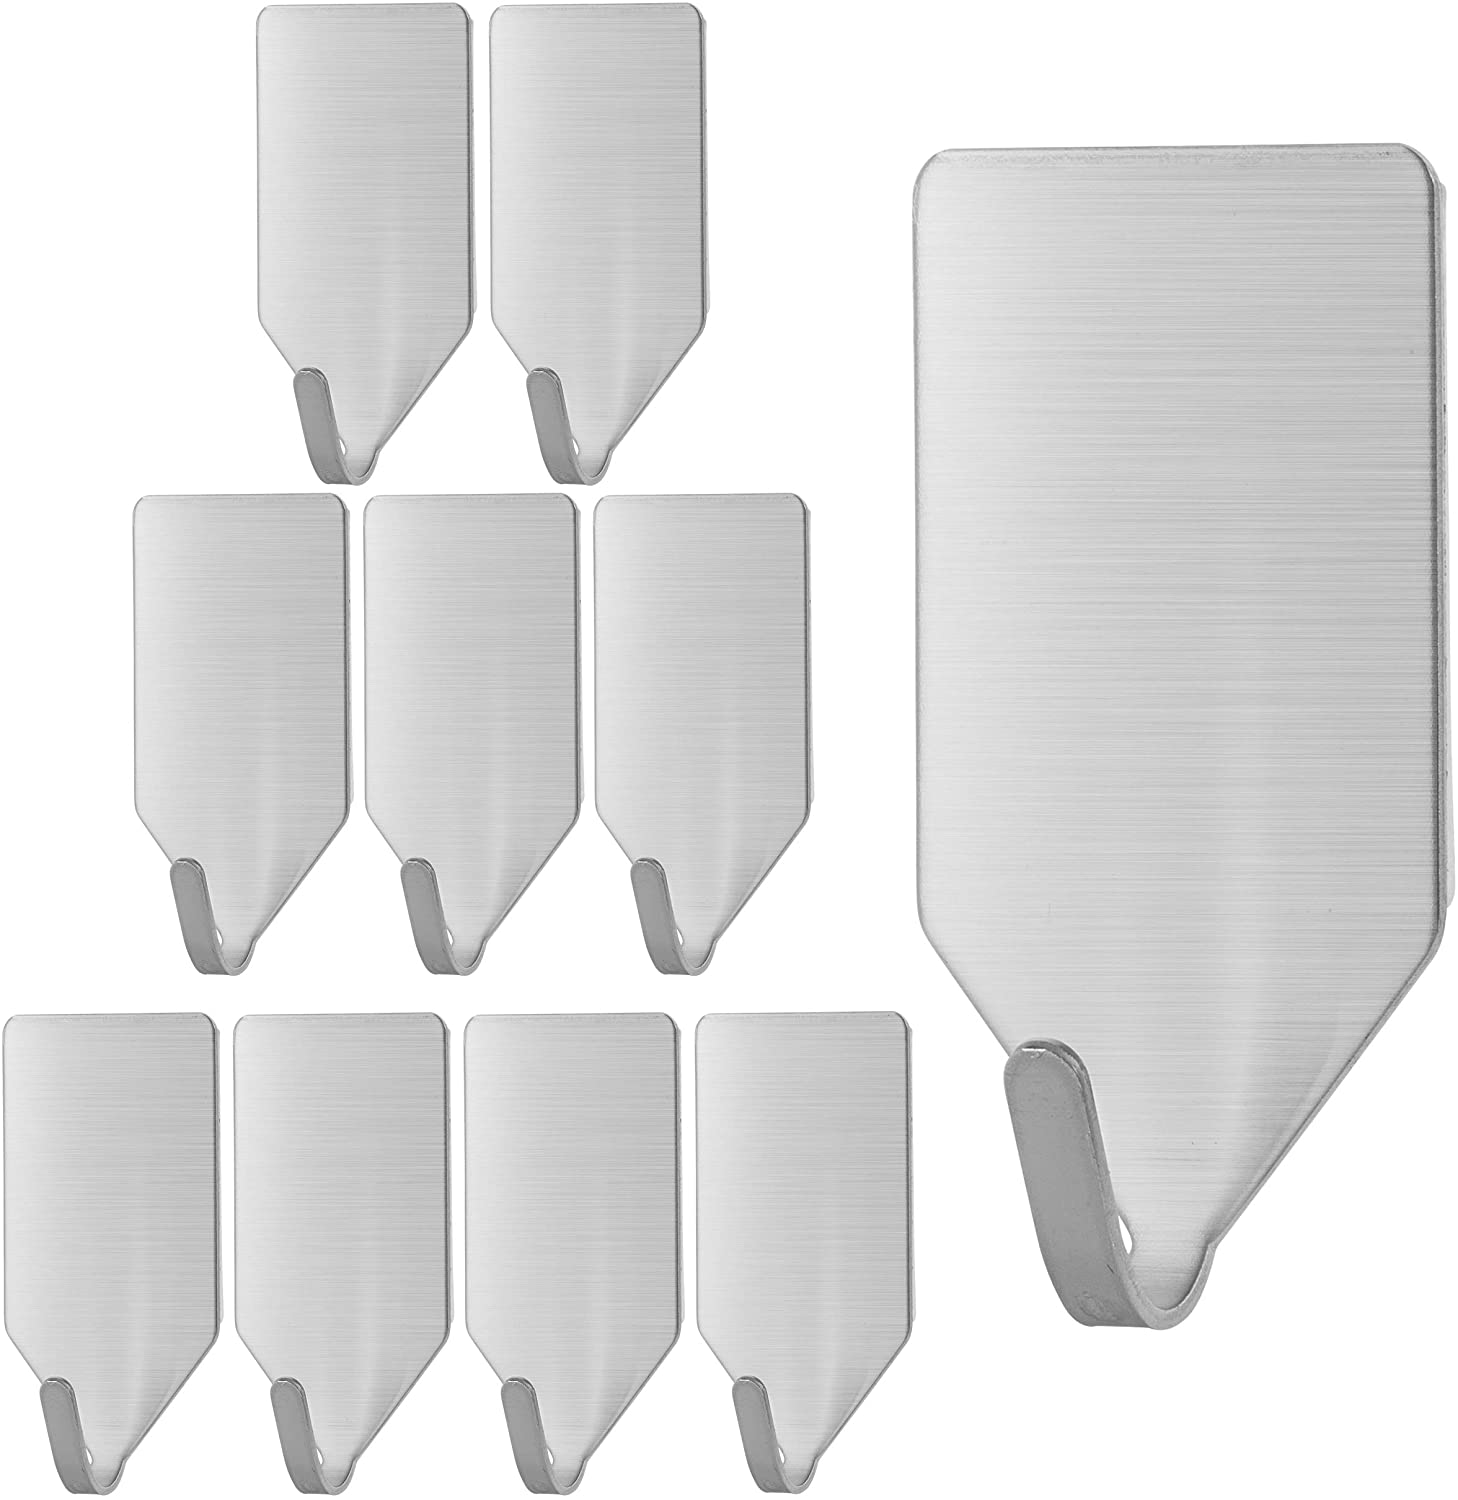 UNCO- Small Adhesive Hooks, 10 Pack, Stainless Steel, Hooks for Hanging  Towels, Adhesive Wall Hooks